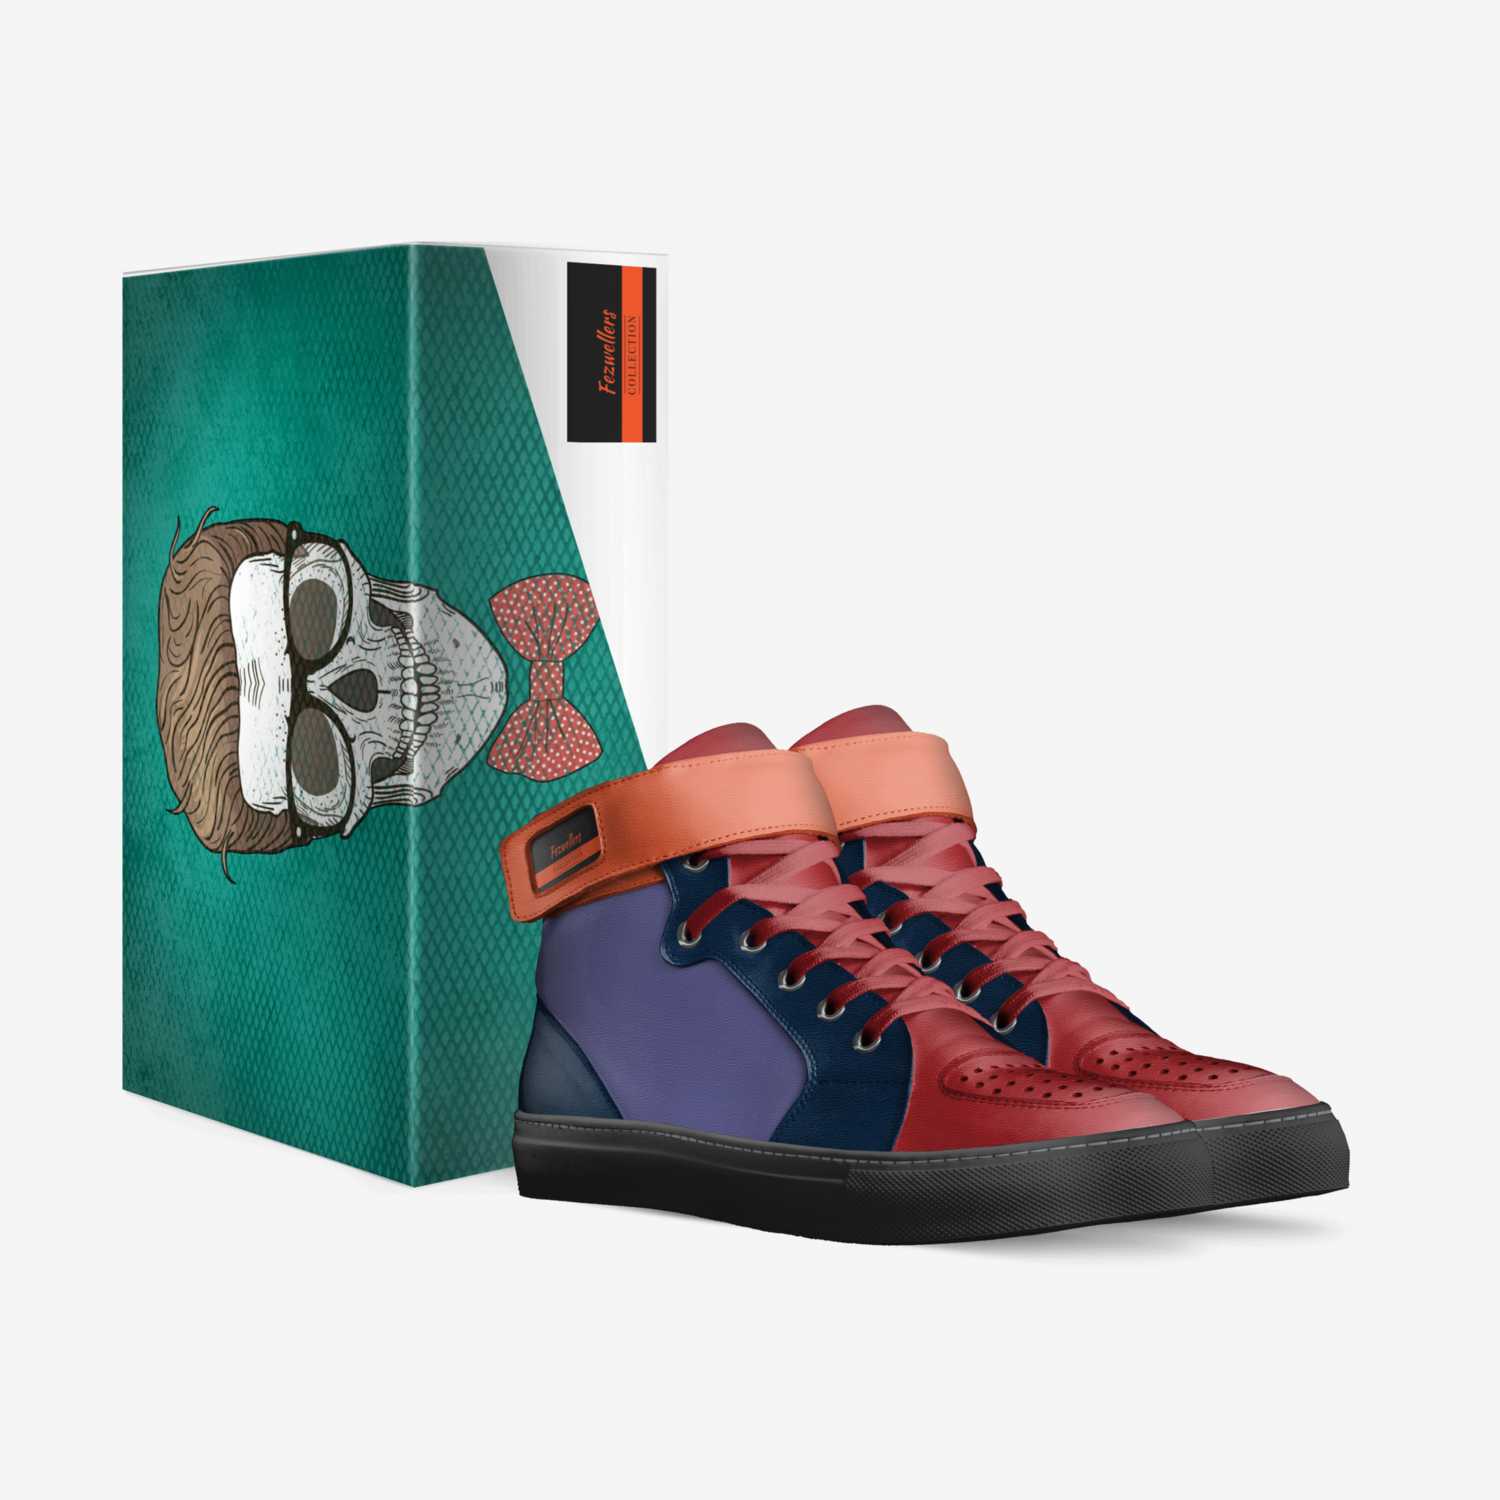 Fezwellers custom made in Italy shoes by Matthew Daron | Box view